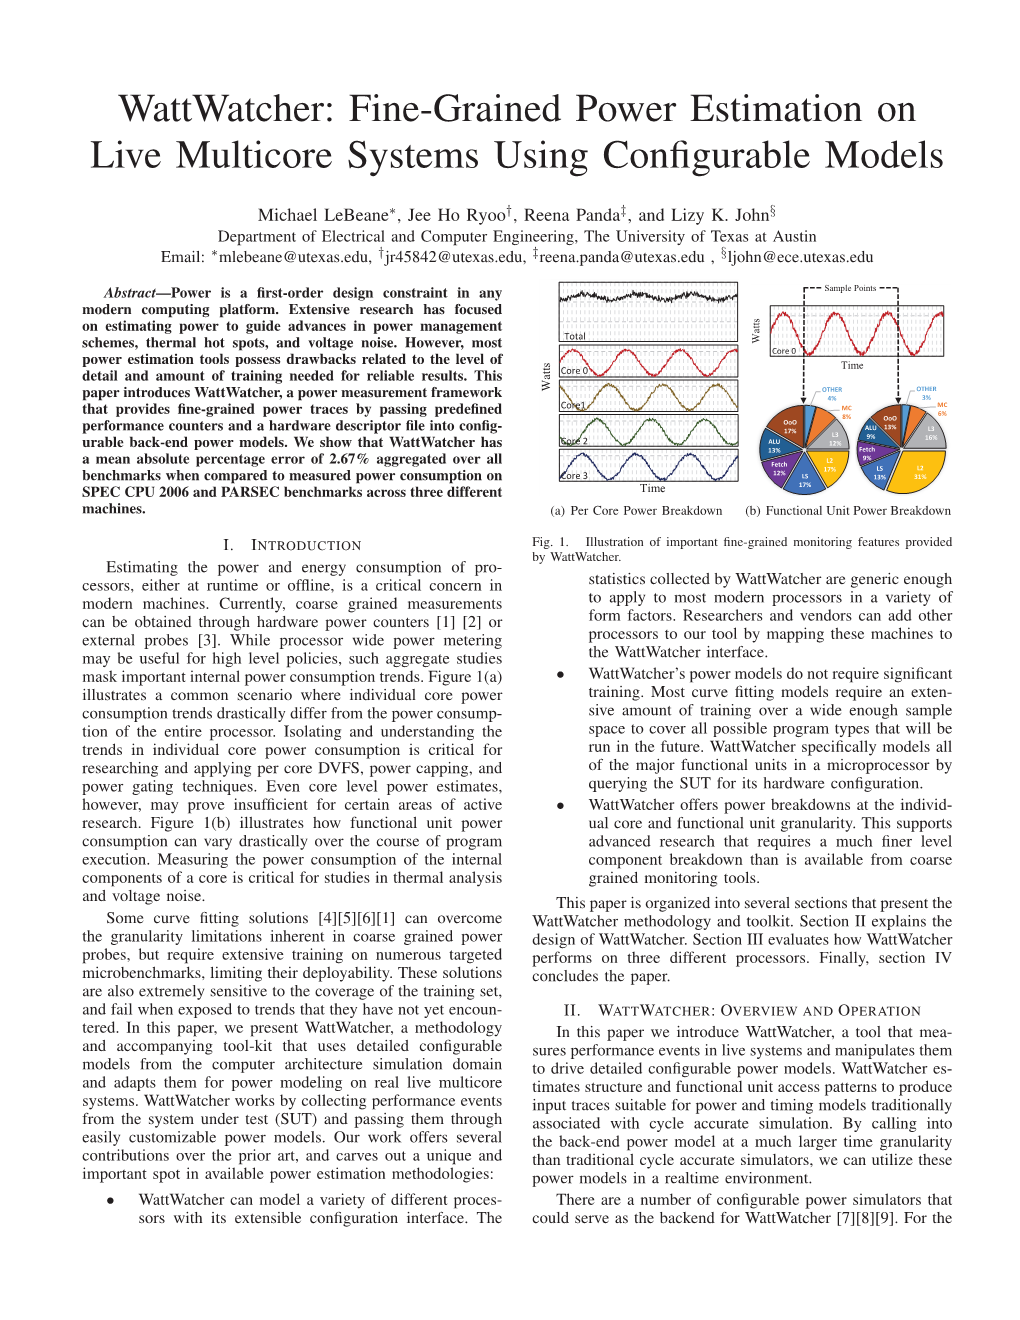 Wattwatcher: Fine-Grained Power Estimation on Live Multicore Systems Using Conﬁgurable Models